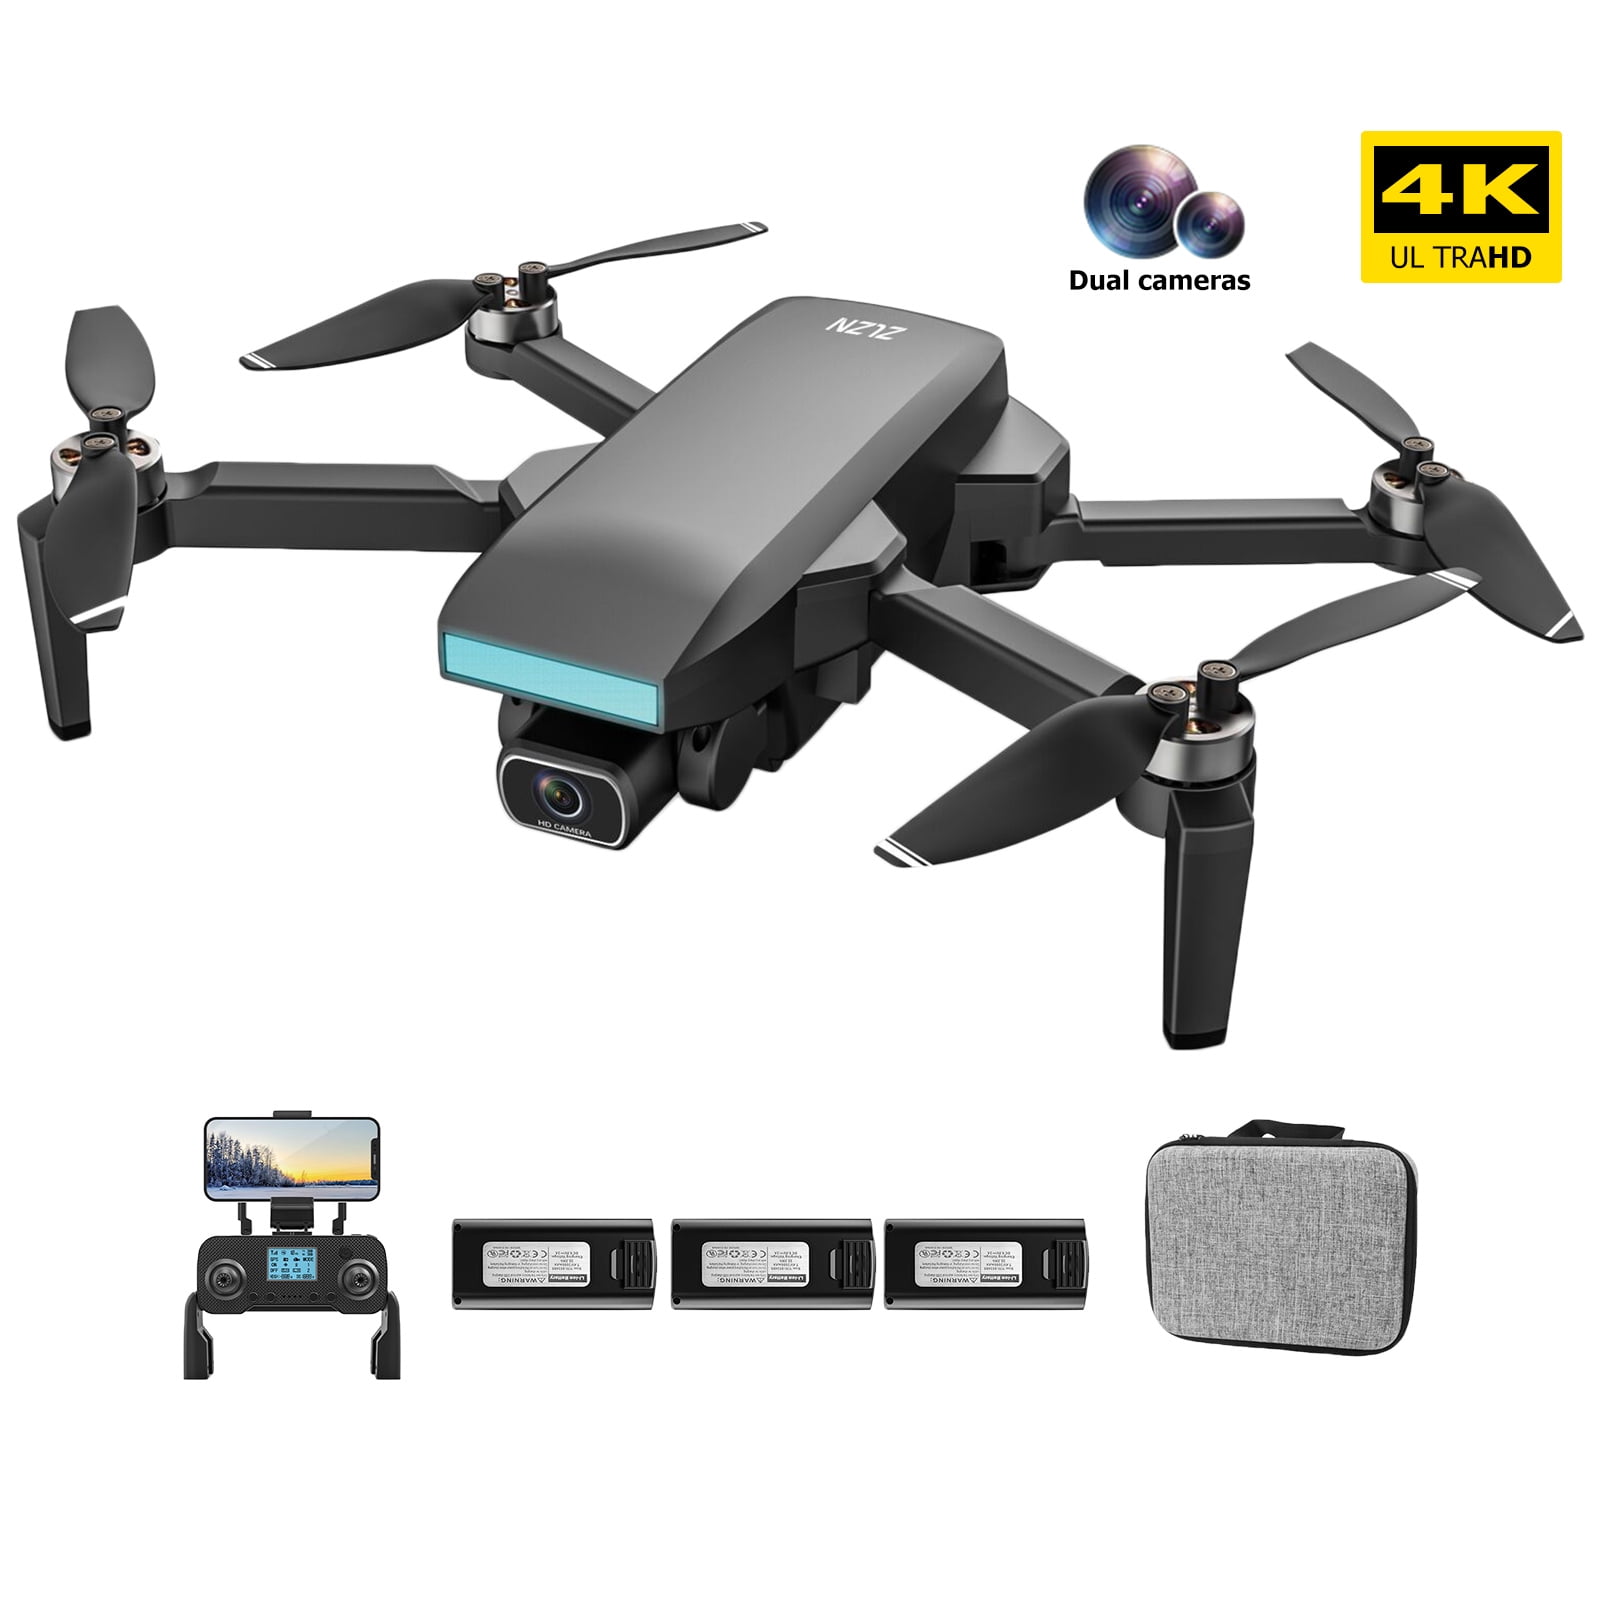 Villain skjold Dokument Folding Drone with Dual 4K HD Camera for Adults, 5G FPV RC Quadcopters,  Brushless Motor, Easy Auto Return Home, GPS Smart Follow RC Drone -  Walmart.com